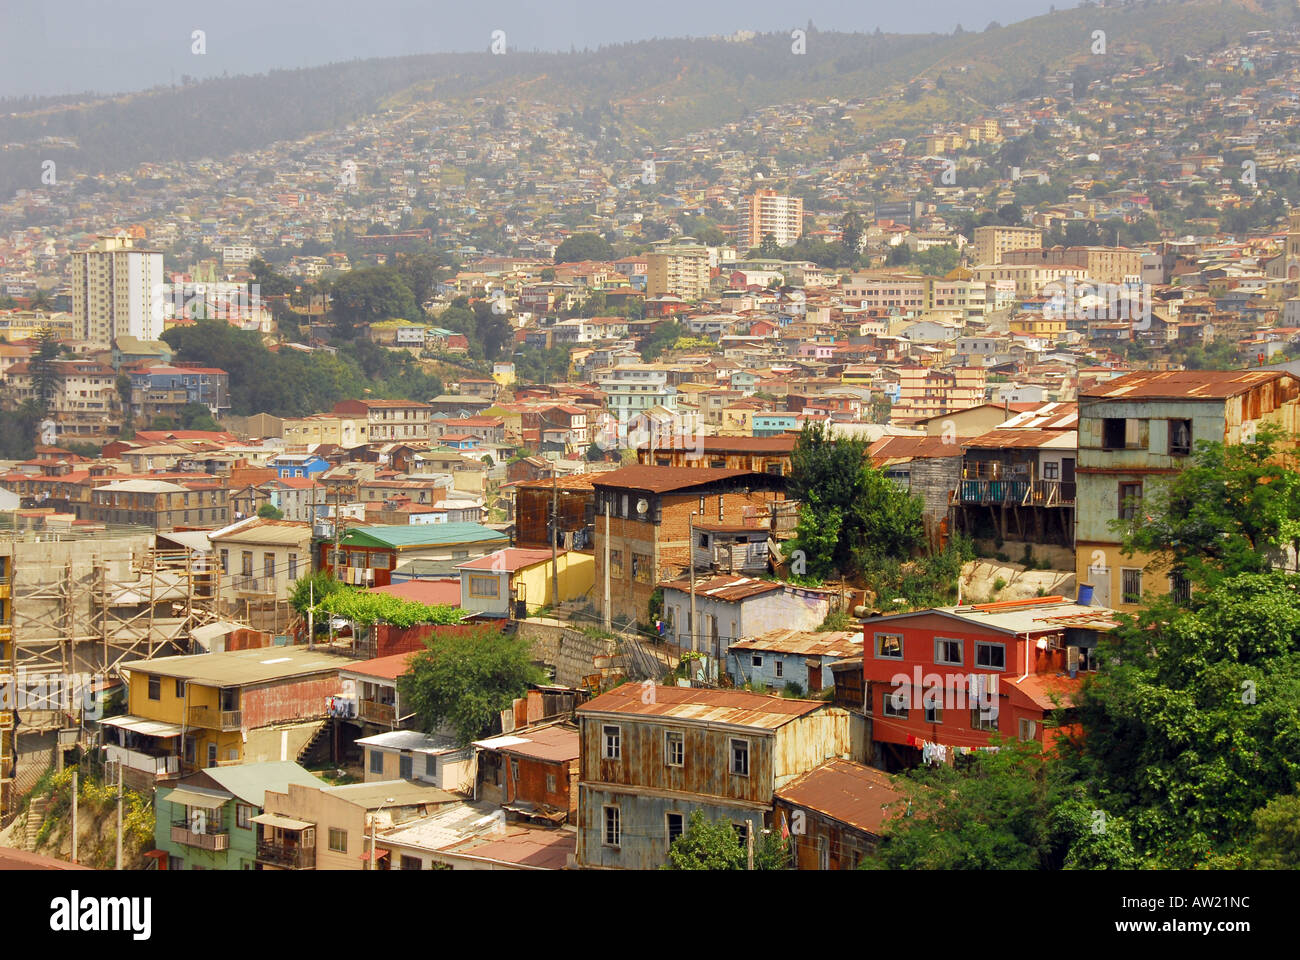 Chile Valparaiso hillside homes packed together overcrowding poverty limited land space Stock Photo